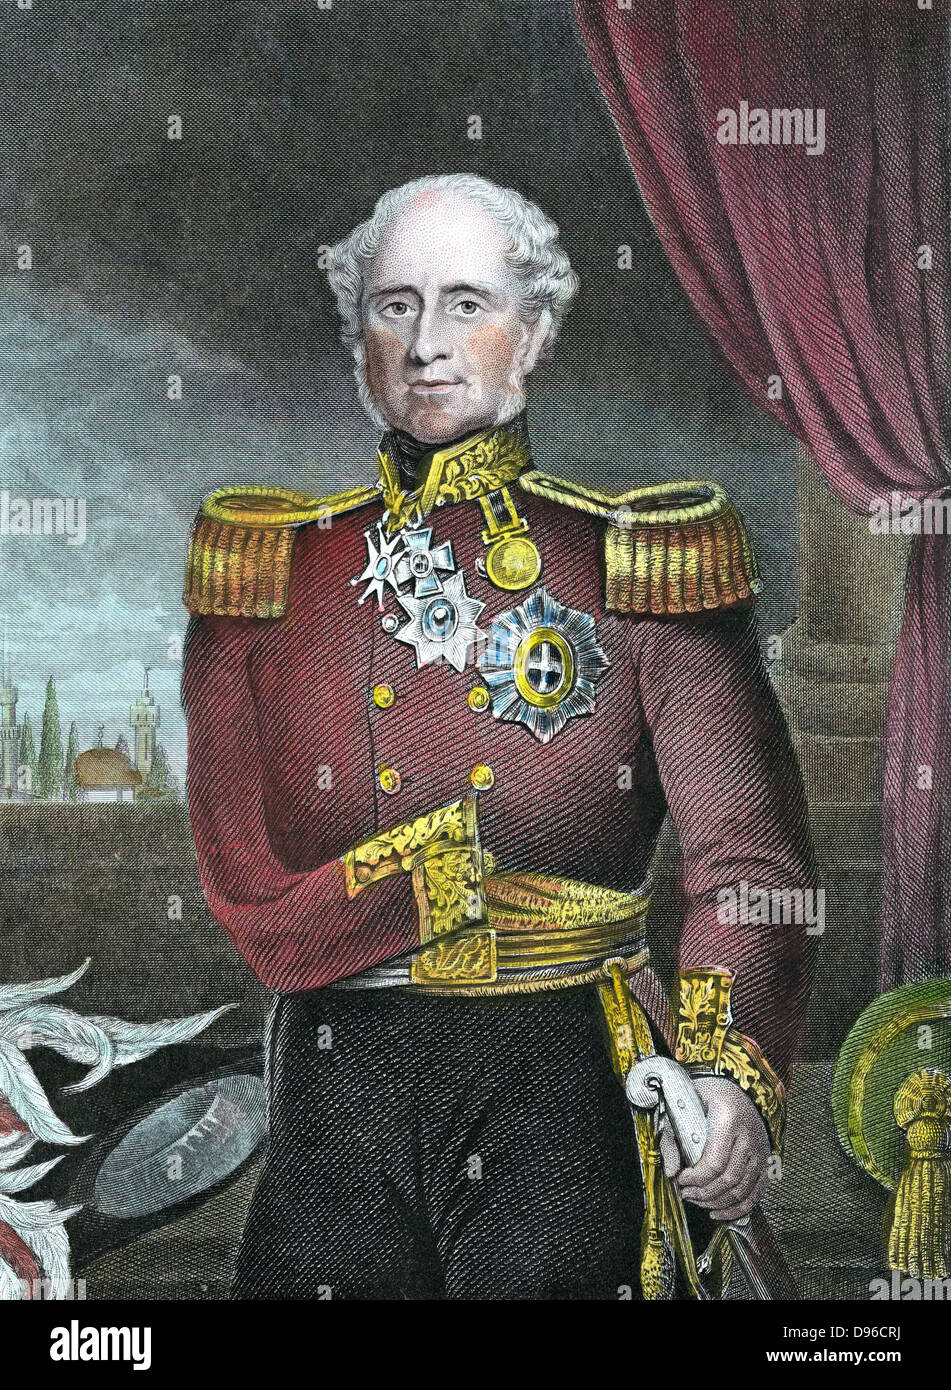 Fitzroy H J Somerset, 1st Baron Raglan (1788-1855) British soldier; on Wellington's staff 1808-1812. Lost his sword arm at Waterloo. Commander-in-Chief of British troops in Crimean War. Gave the order for Charge of the Light Brigade at Balaclava 1854. Engraving. Stock Photo